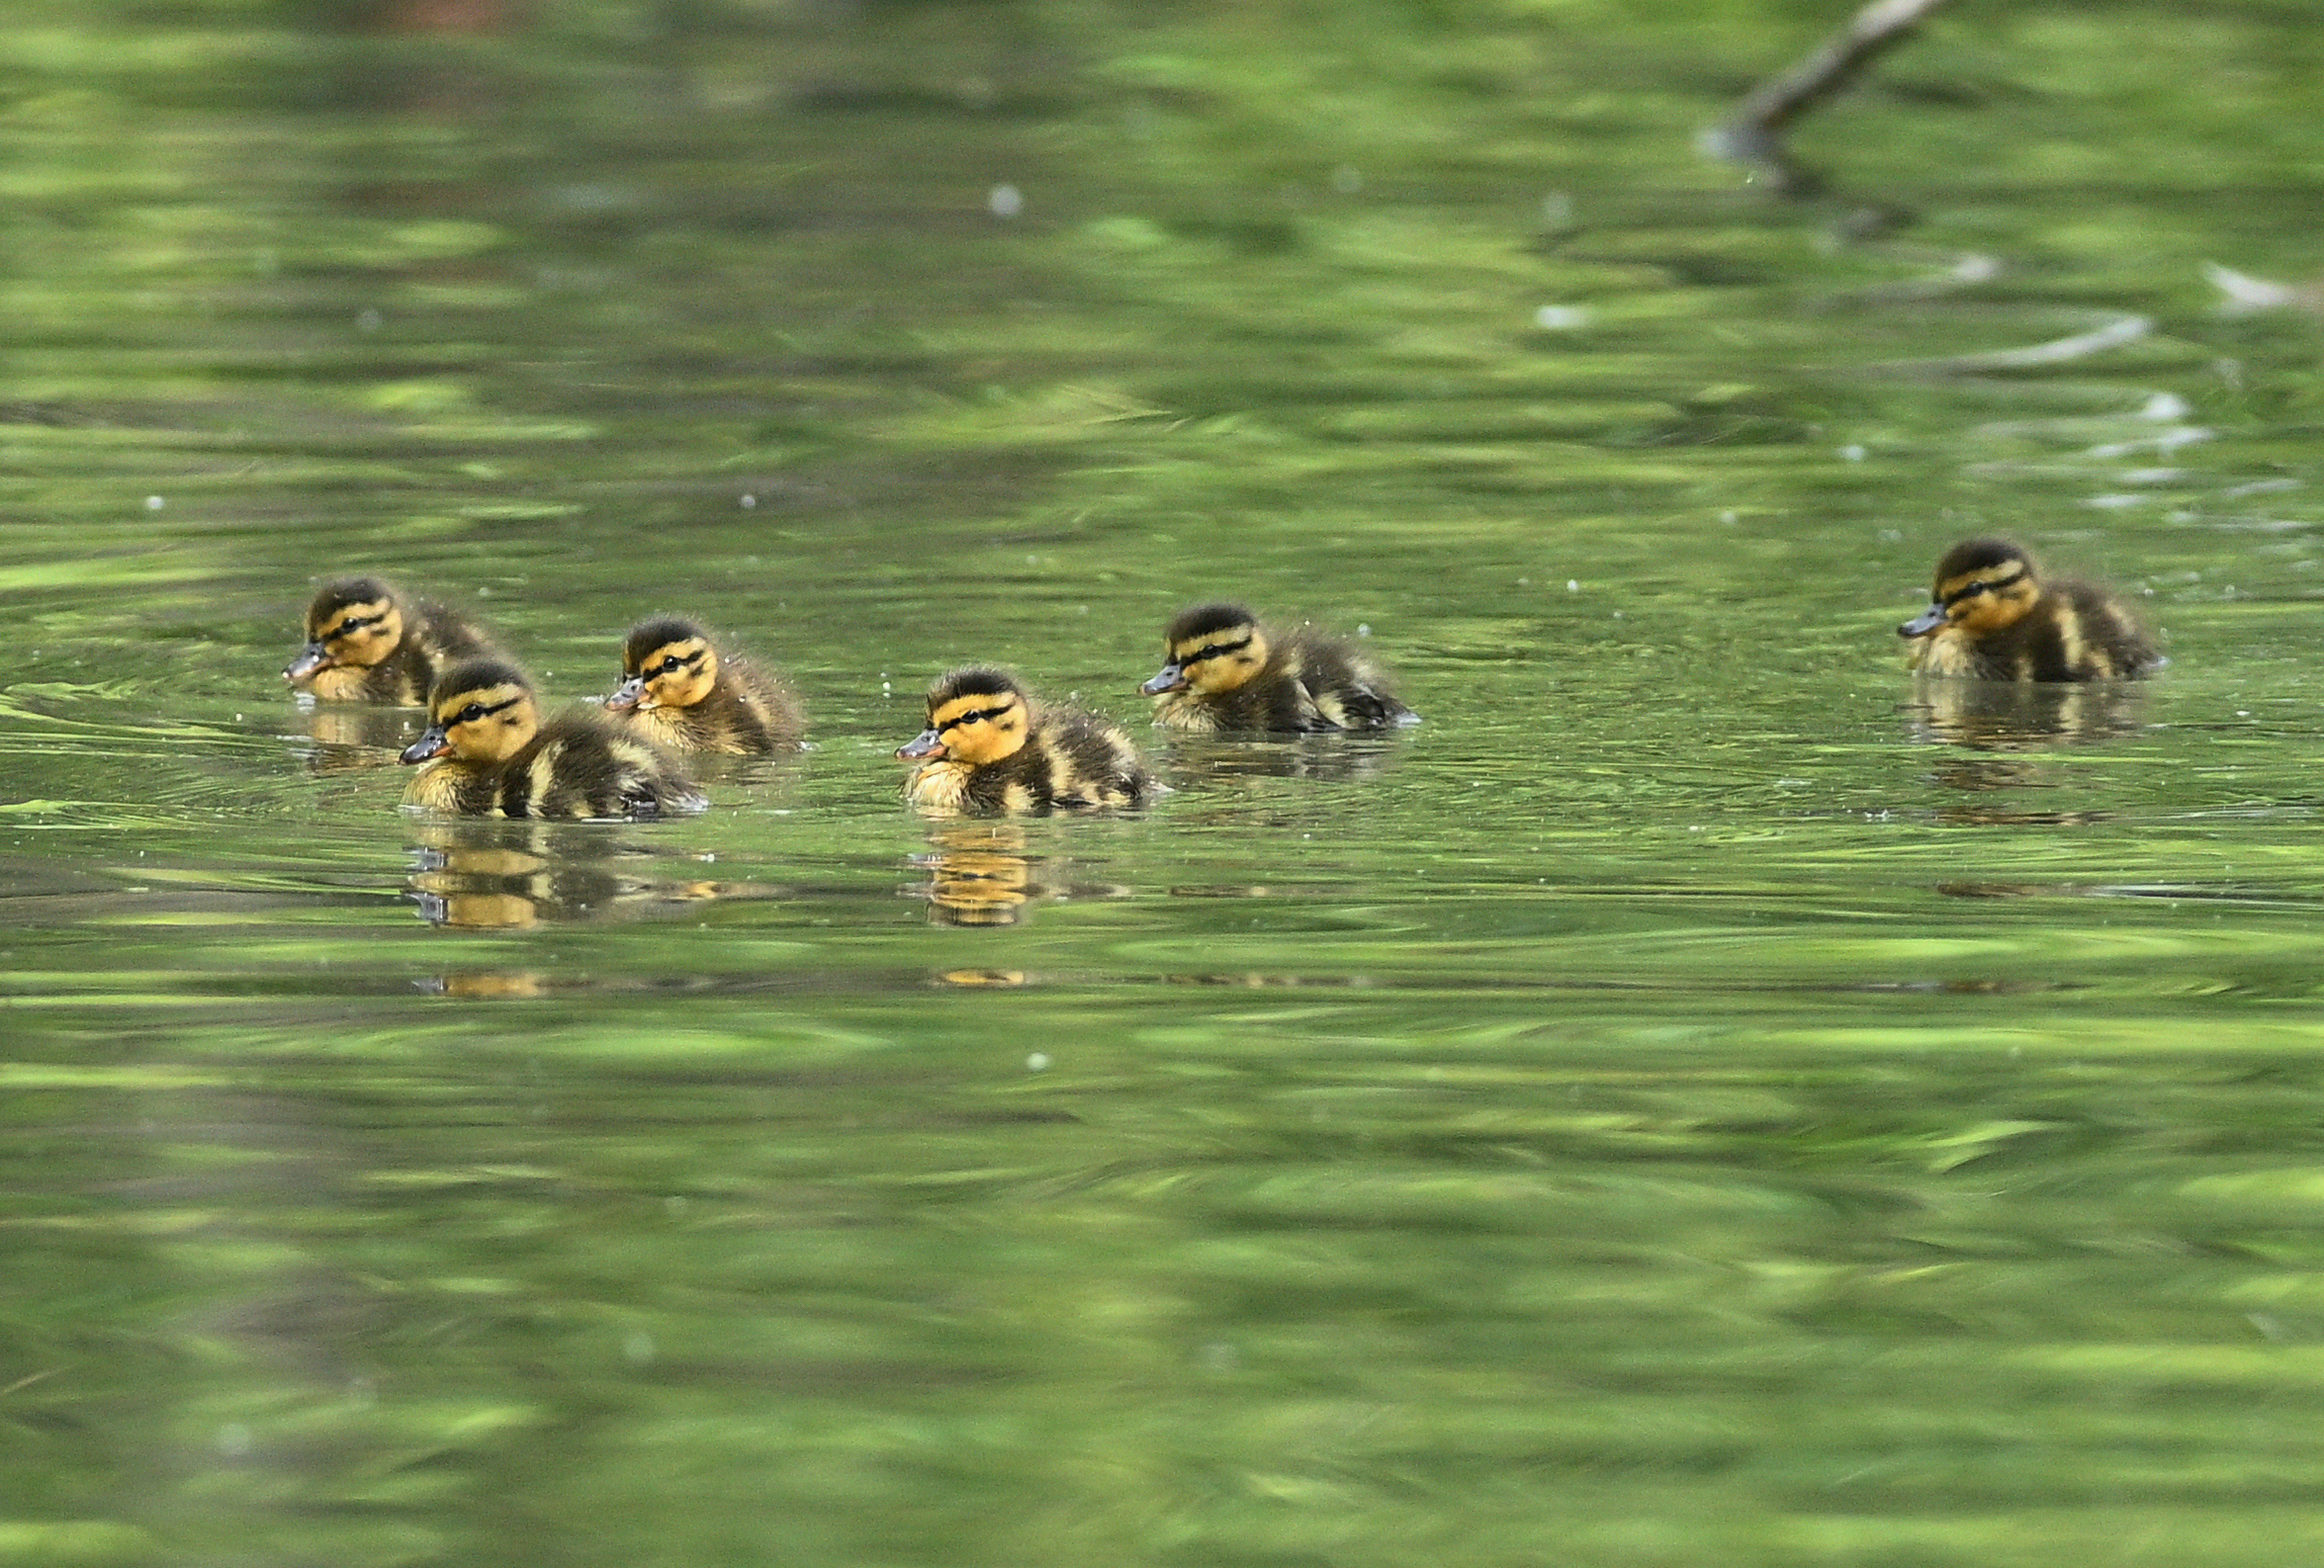 Ducklings alone, without parents......